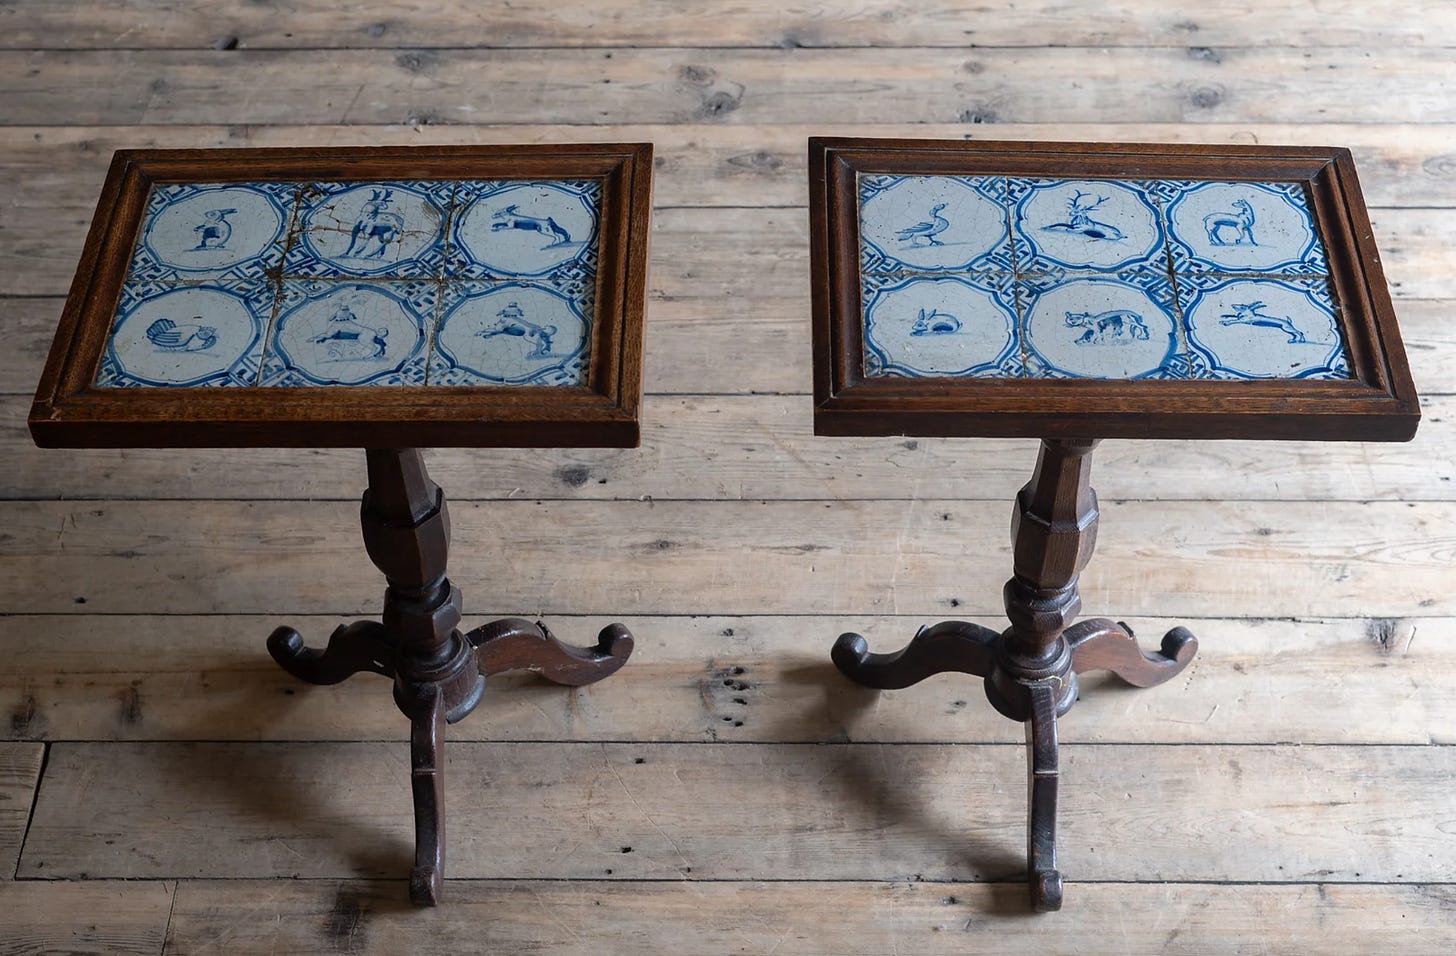 William Green, A Pair Of Oak Occasional Table With Delft Tiles, £2,500